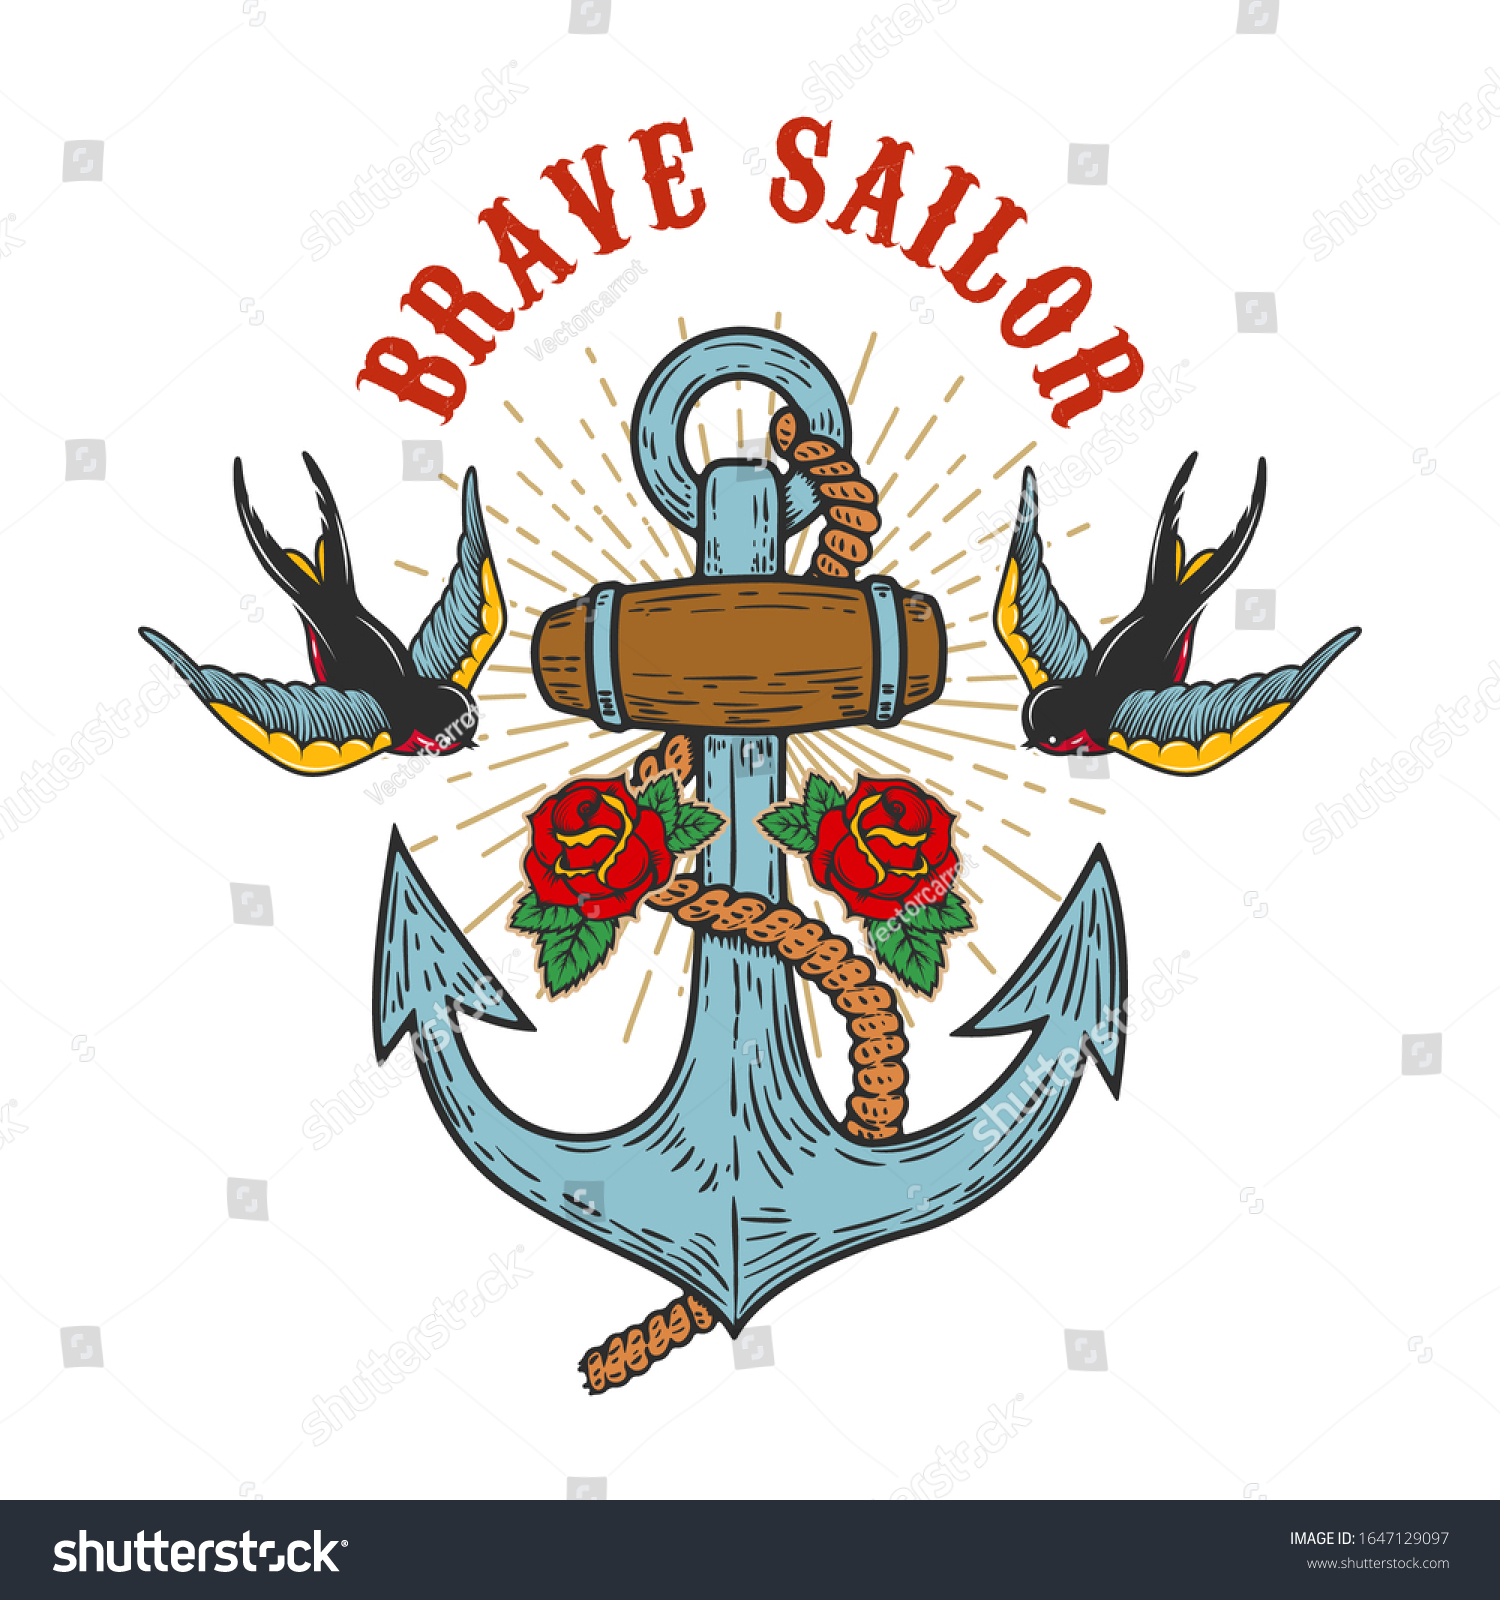 Illustration Vintage Anchor Swallows Engraving Style Stock Vector ...